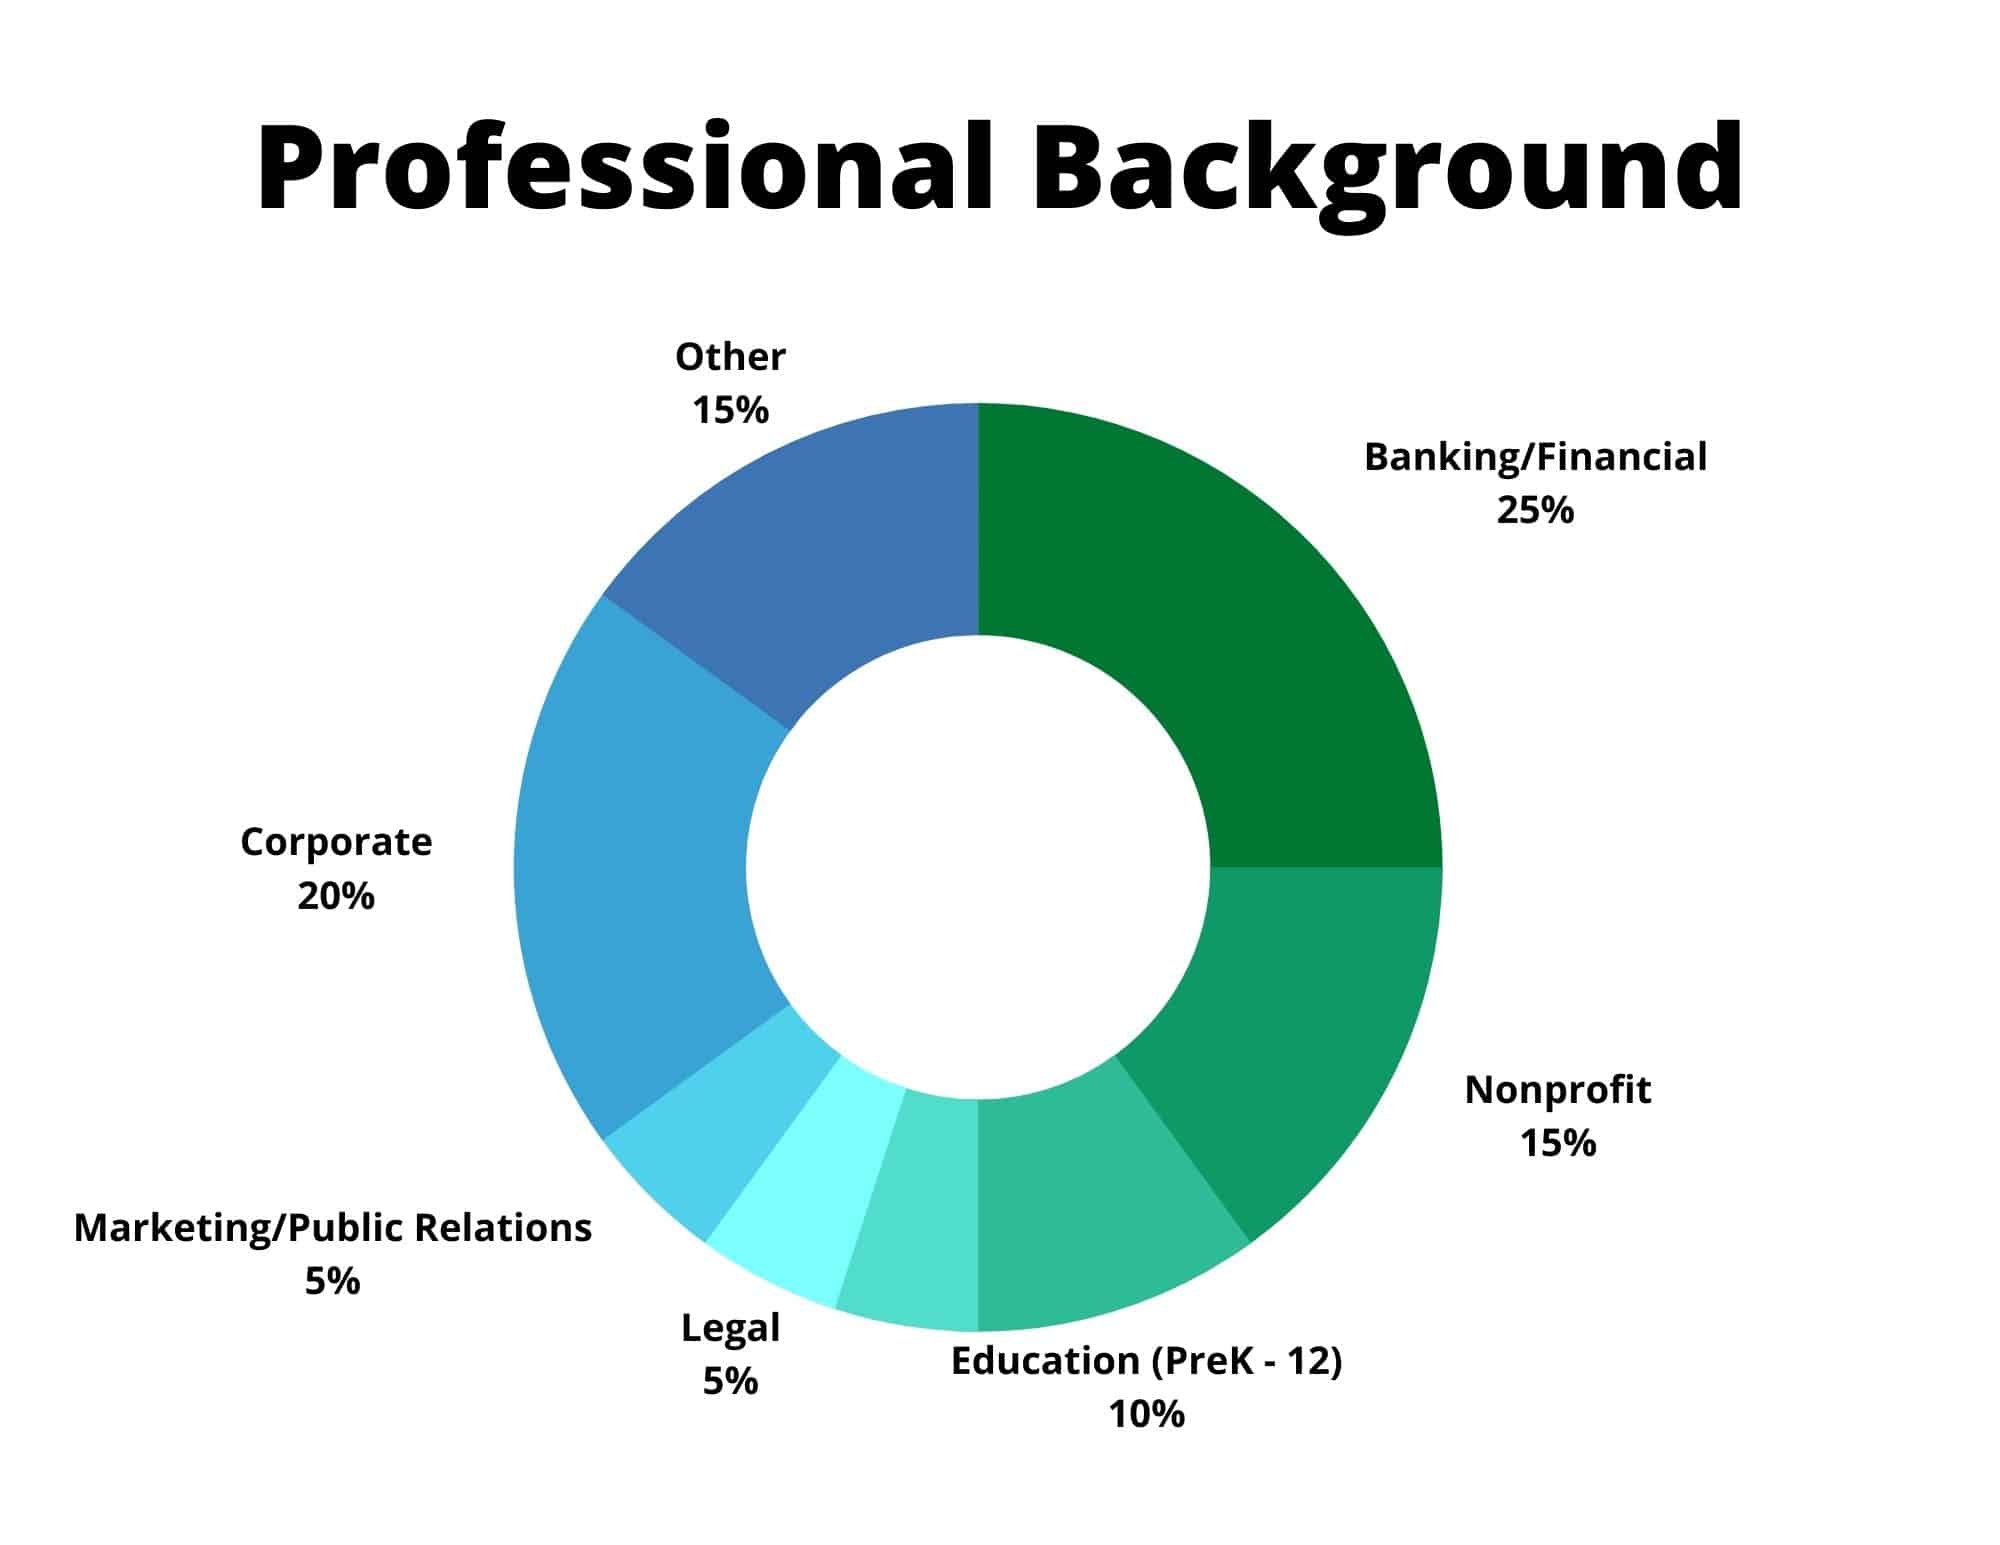 The Gifford Foundation's board represents a range of different professional backgrounds.